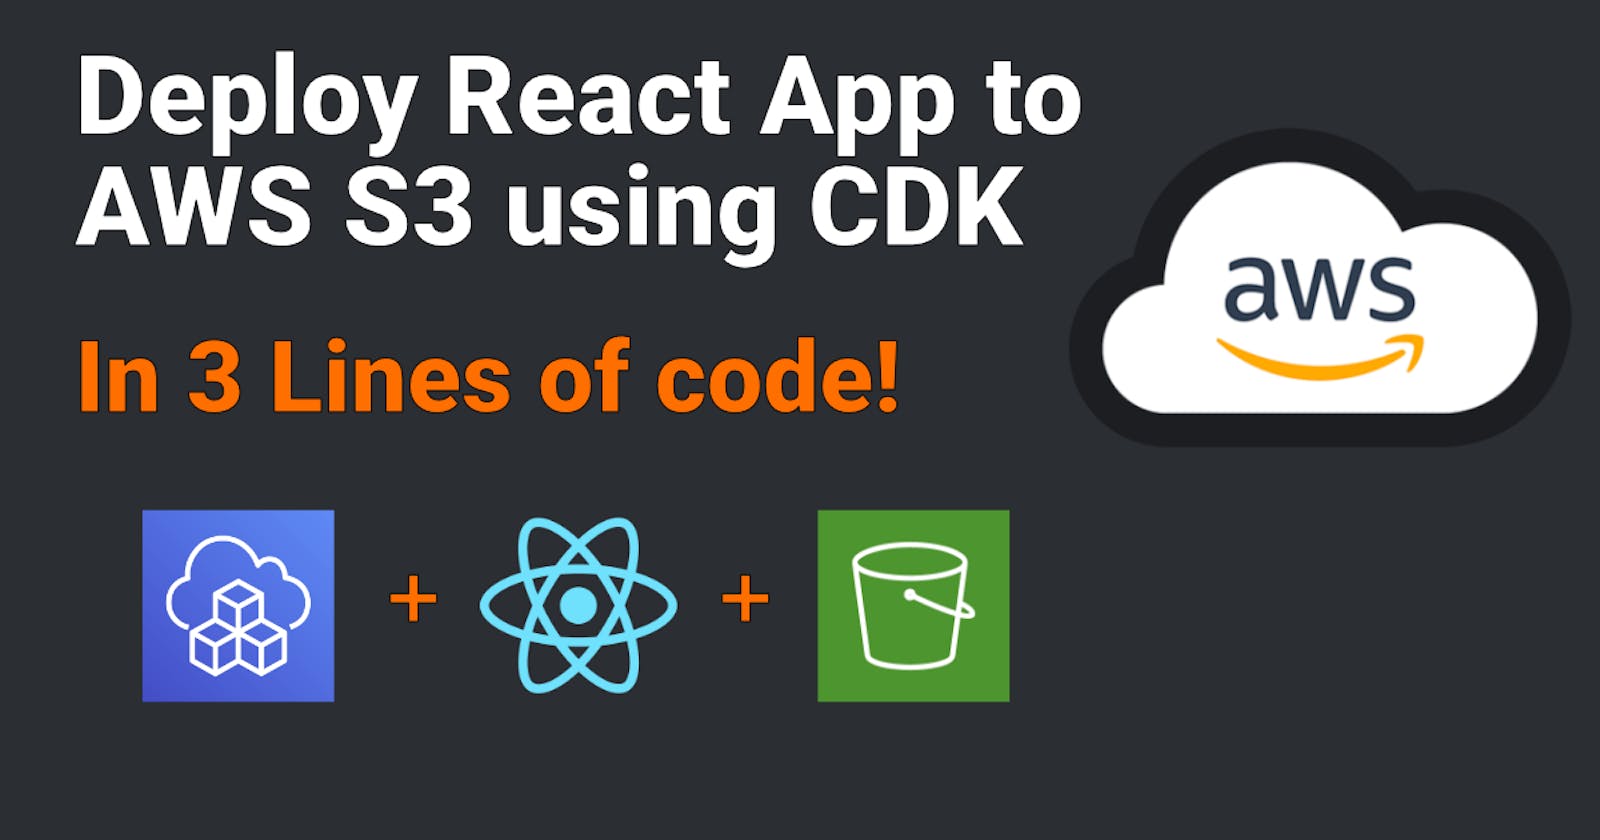 Deploy a React App to Amazon S3 + CloudFront using CDK in 3 Lines of Code!